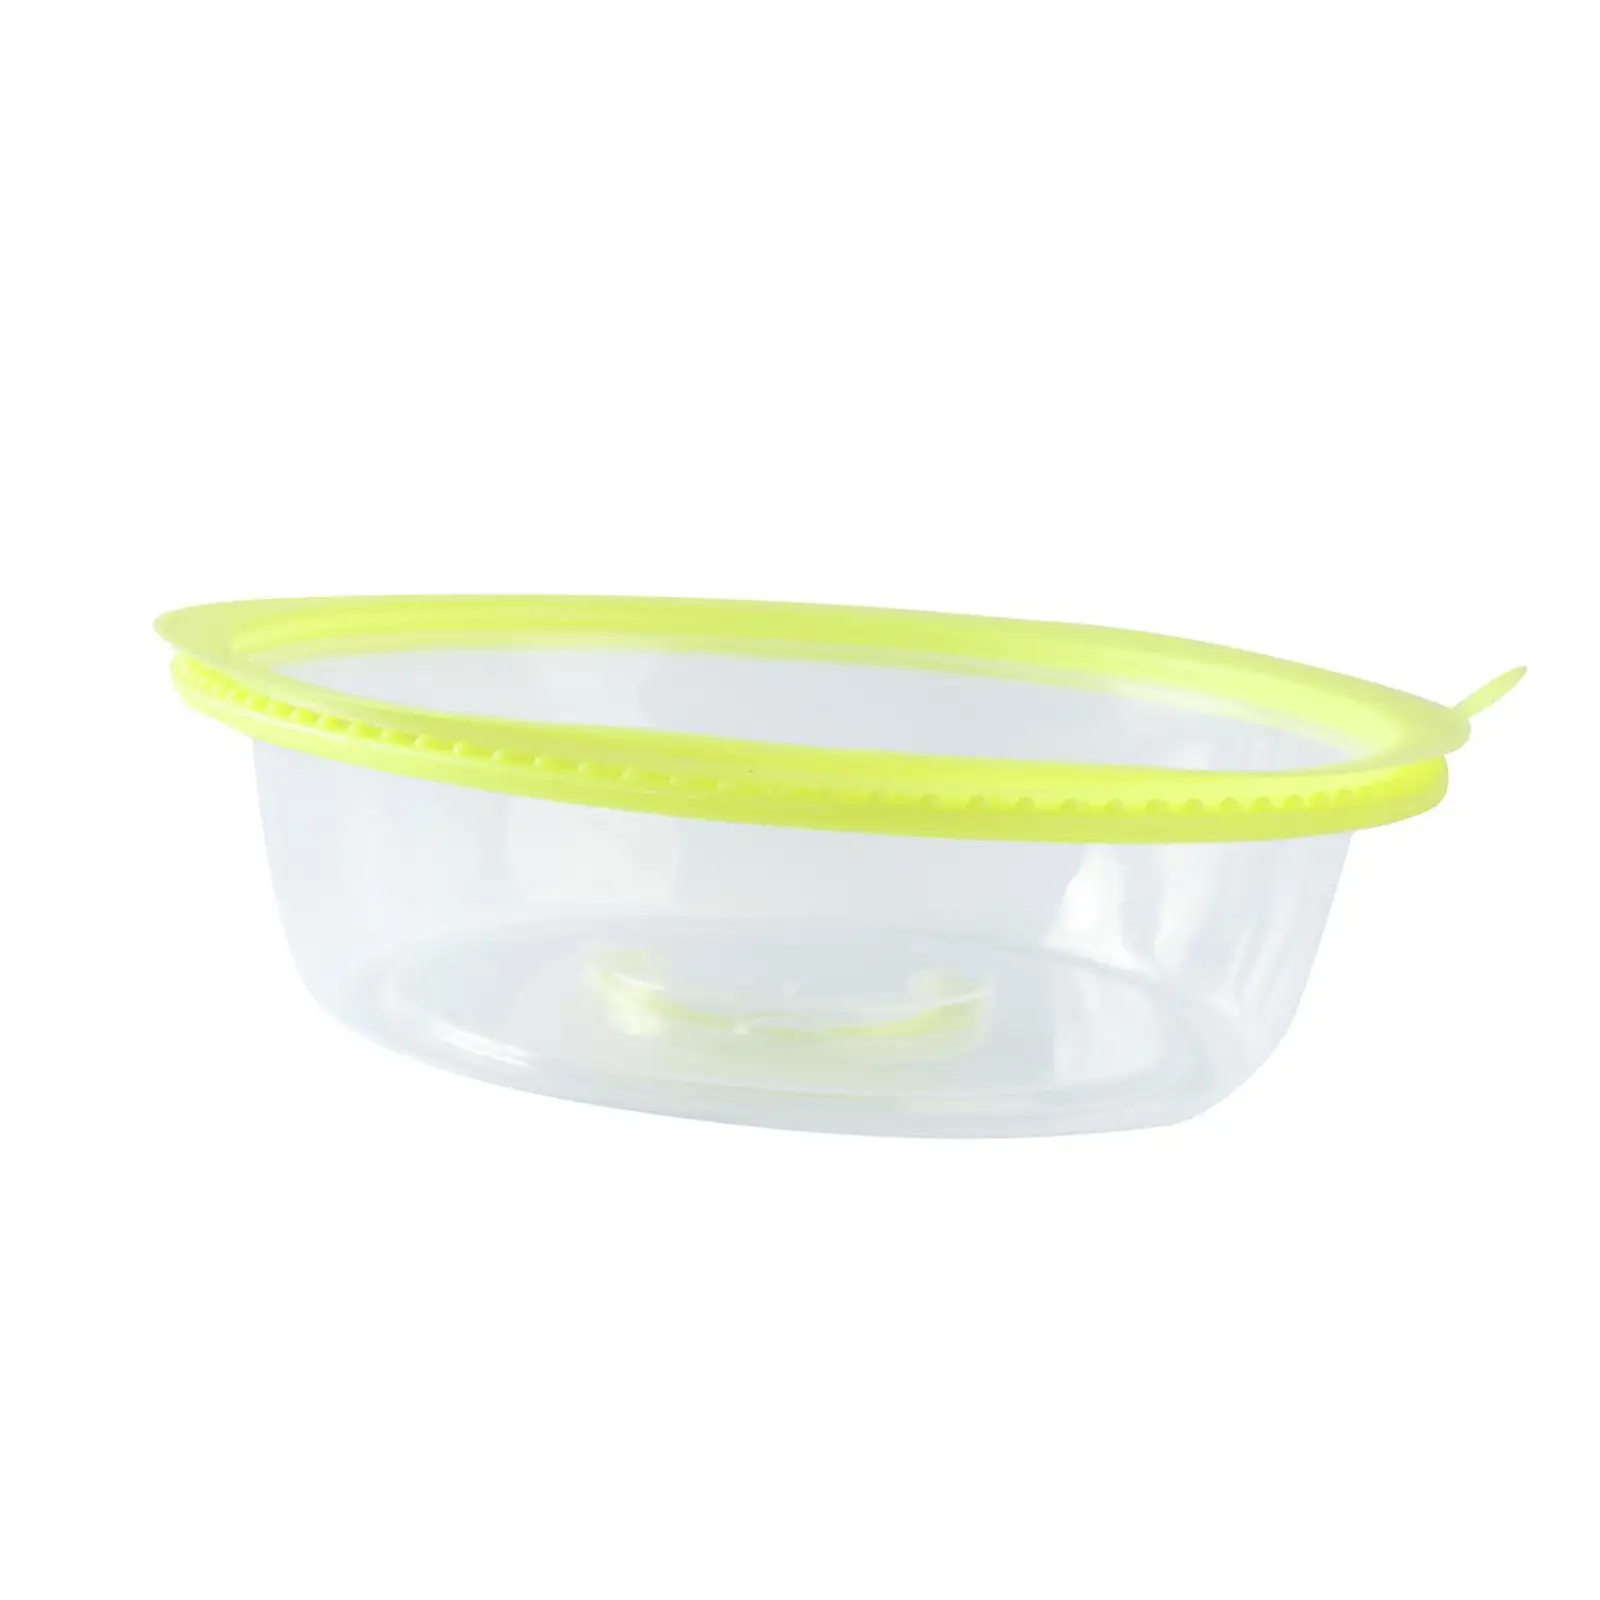 Cover Reusable Platter Lid Cover Universal Kitchen Accessories for Snacks Fruits Cakes Vegetables